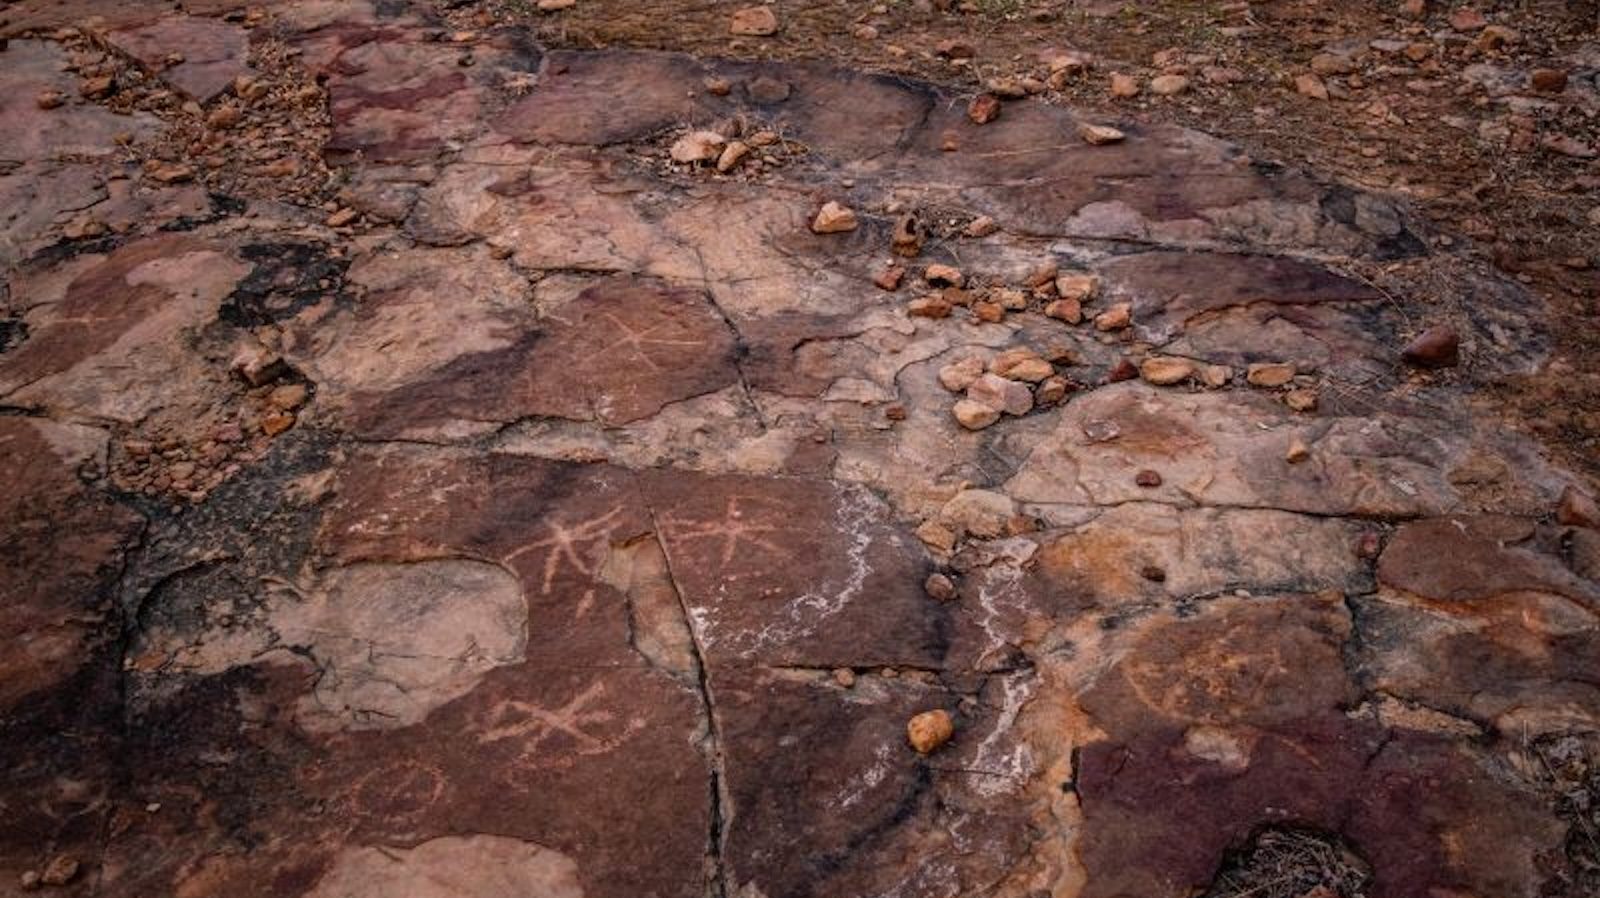 Mysterious symbols found near the footprints shed light on ancient people's knowledge of mythology, scientists say.